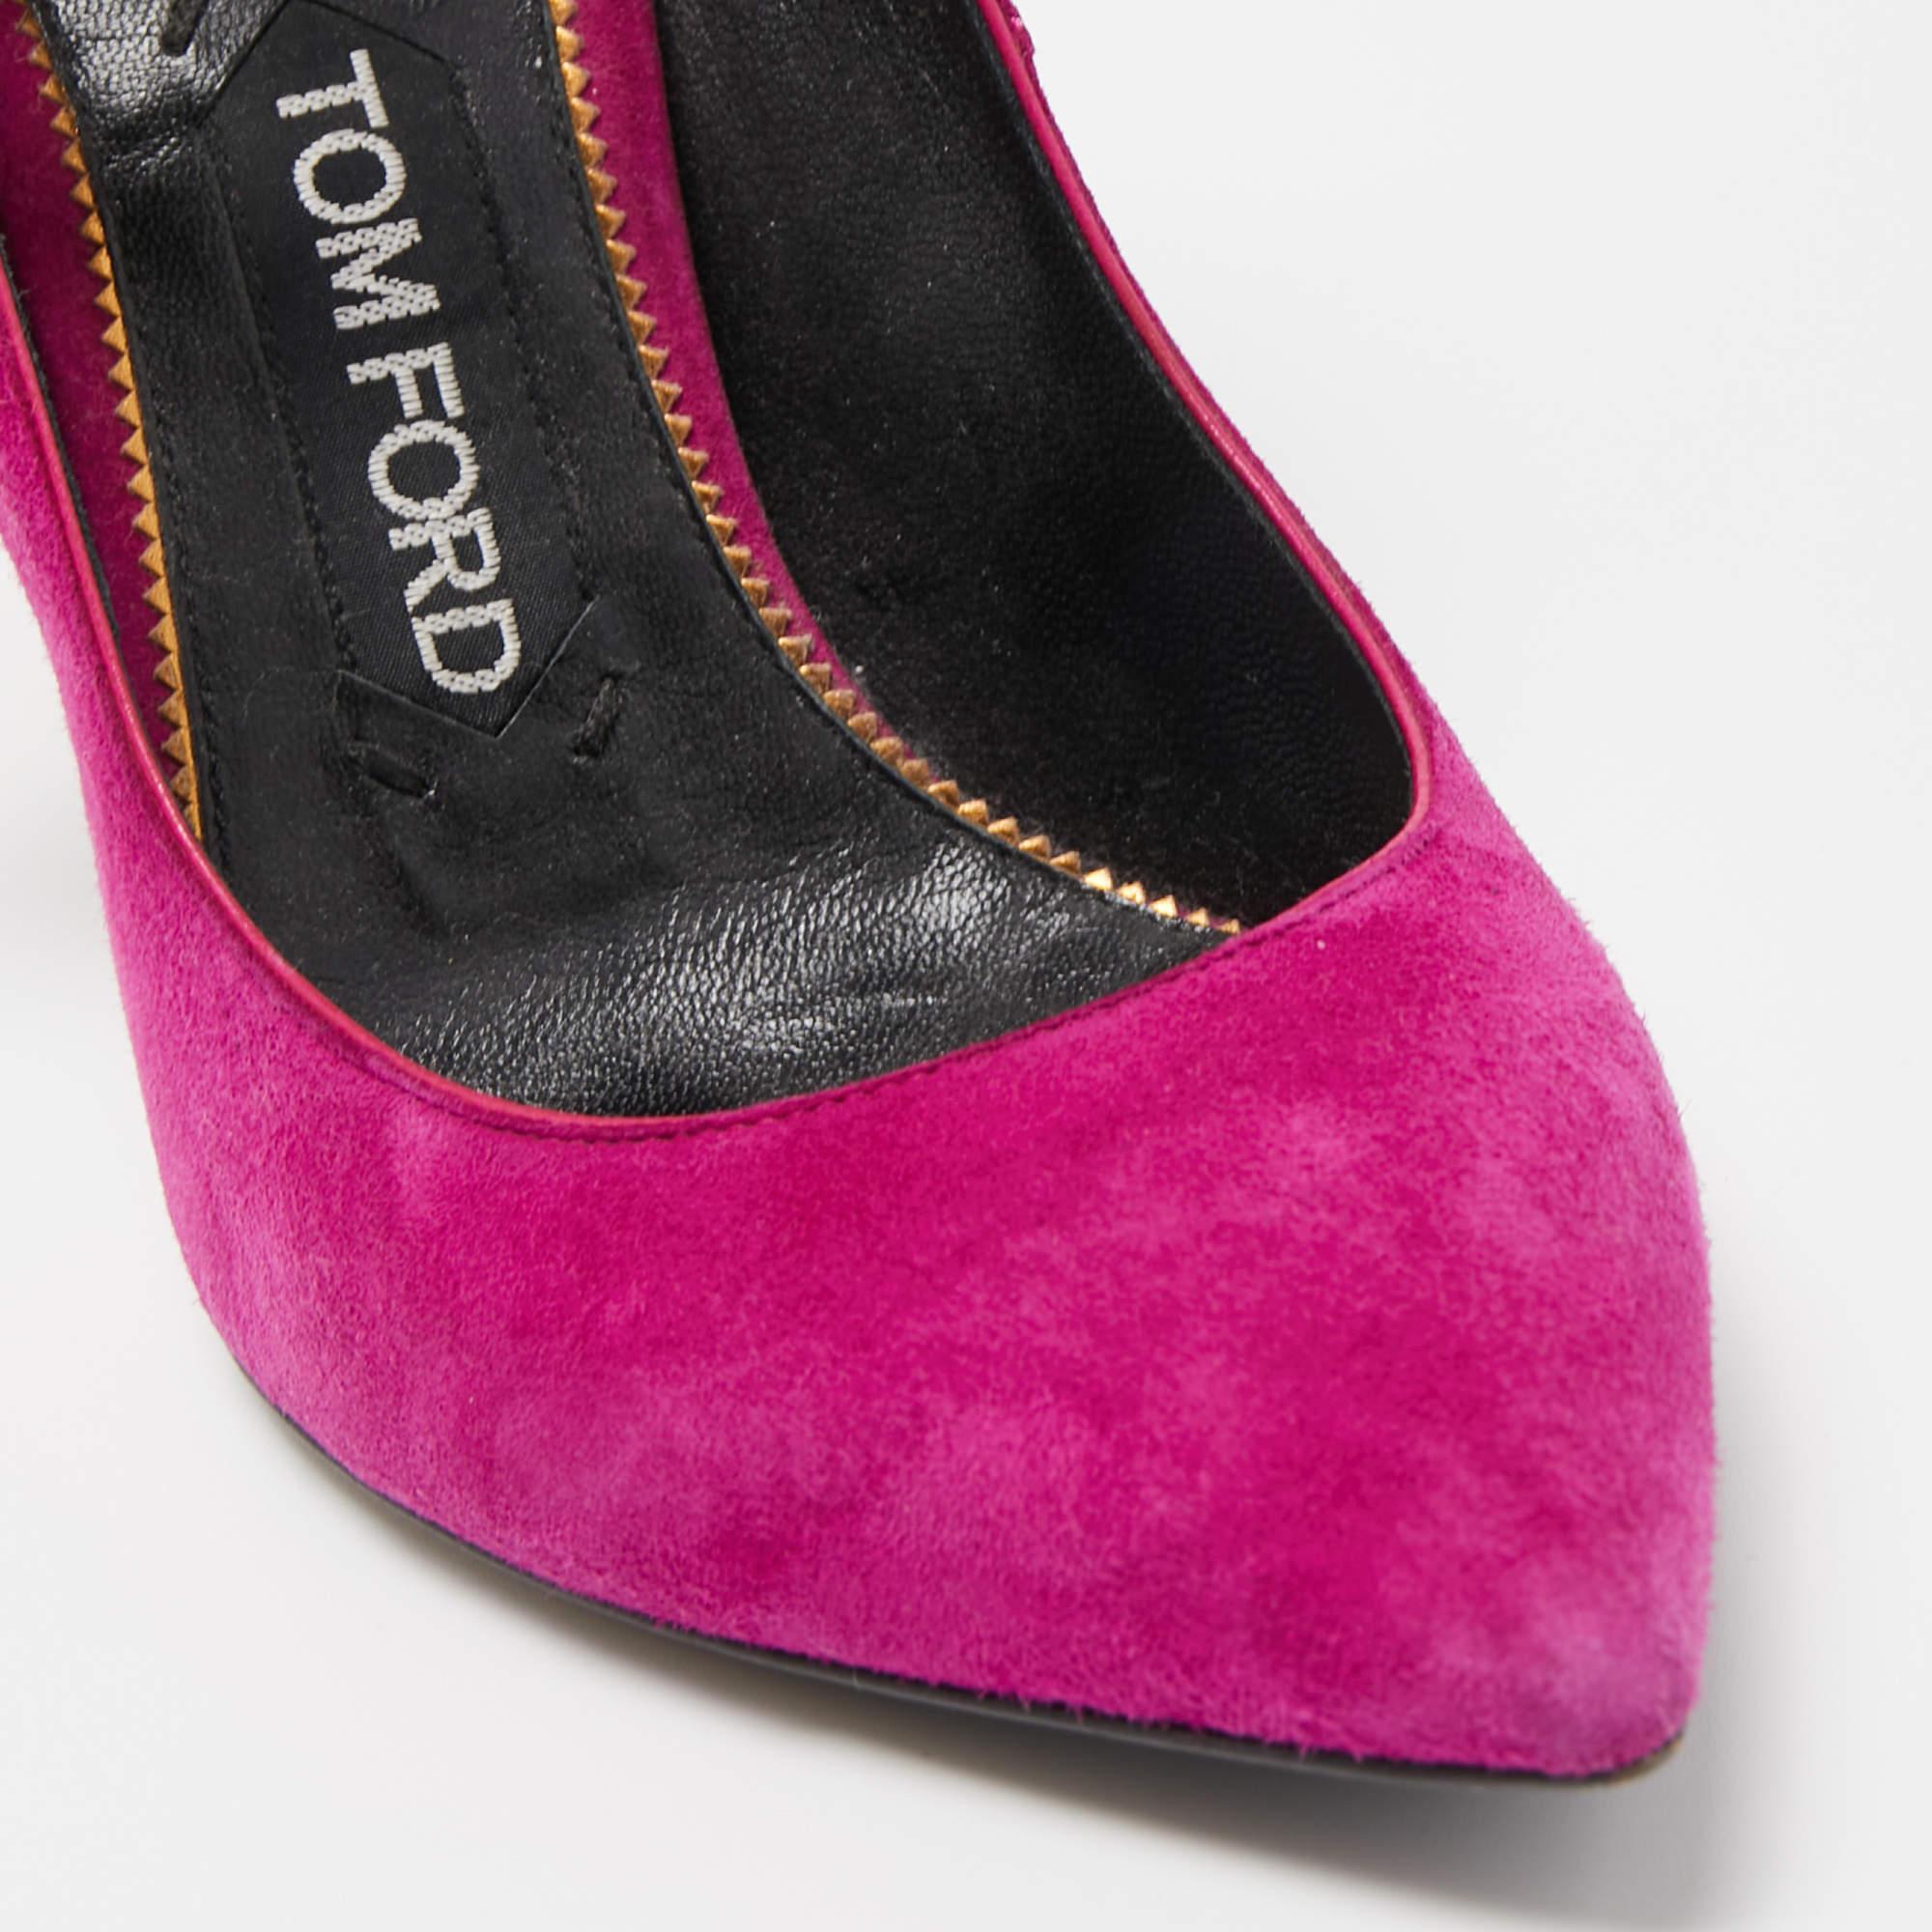 Tom Ford Purple Suede Pointed Toe Padlock Pumps Size 36.5 For Sale 1